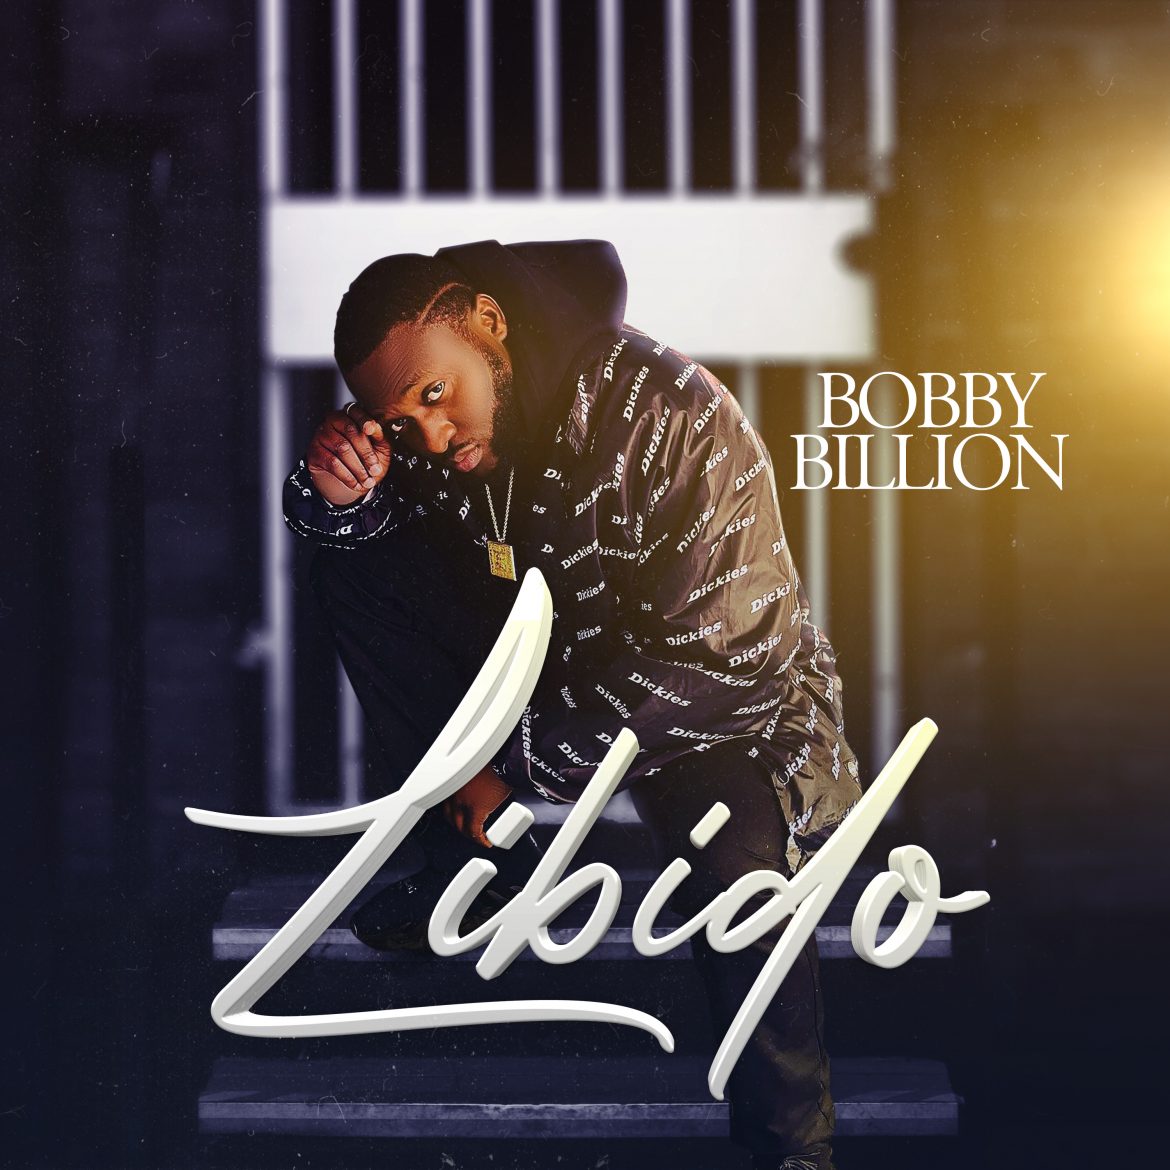 After working with A-list Ghanaian artistes like Castro, R2bees and shattawale, ‘Bobby Billion’ a.k.a ‘richbynature’ drops new single ‘Libido’.